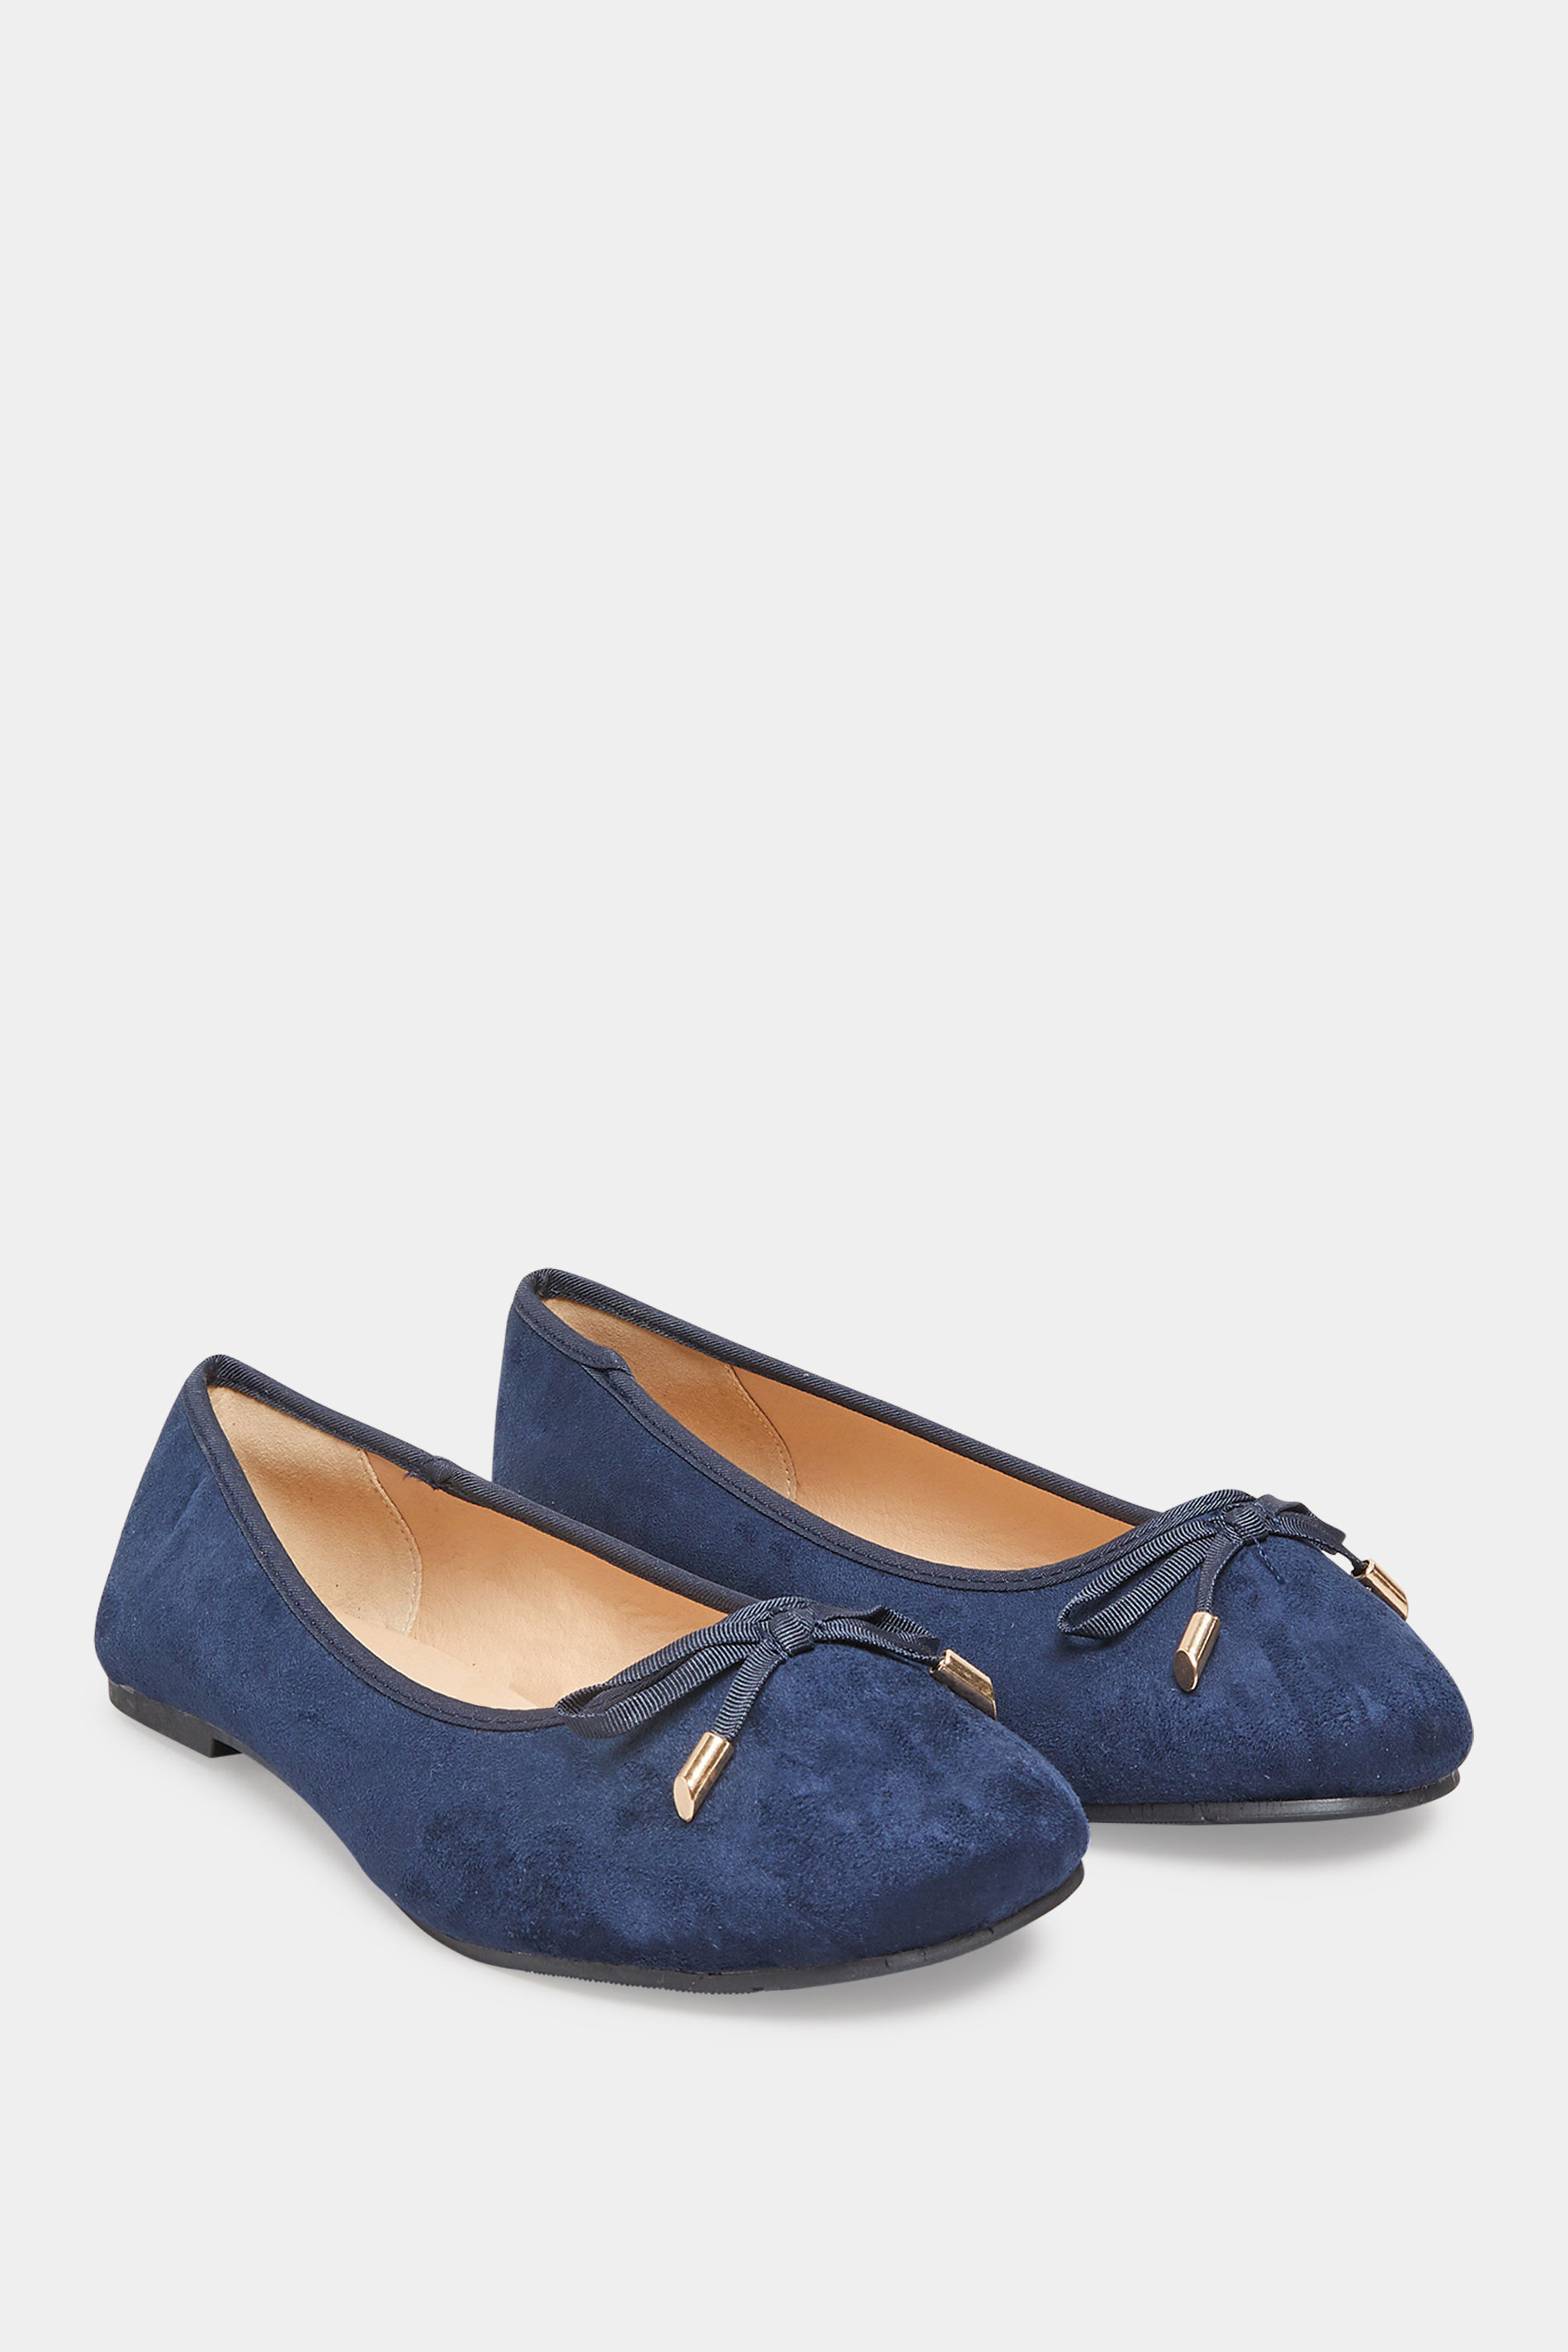 Navy Blue Ballerina Pumps In Wide E Fit & Extra Wide EEE Fit | Yours Clothing 2